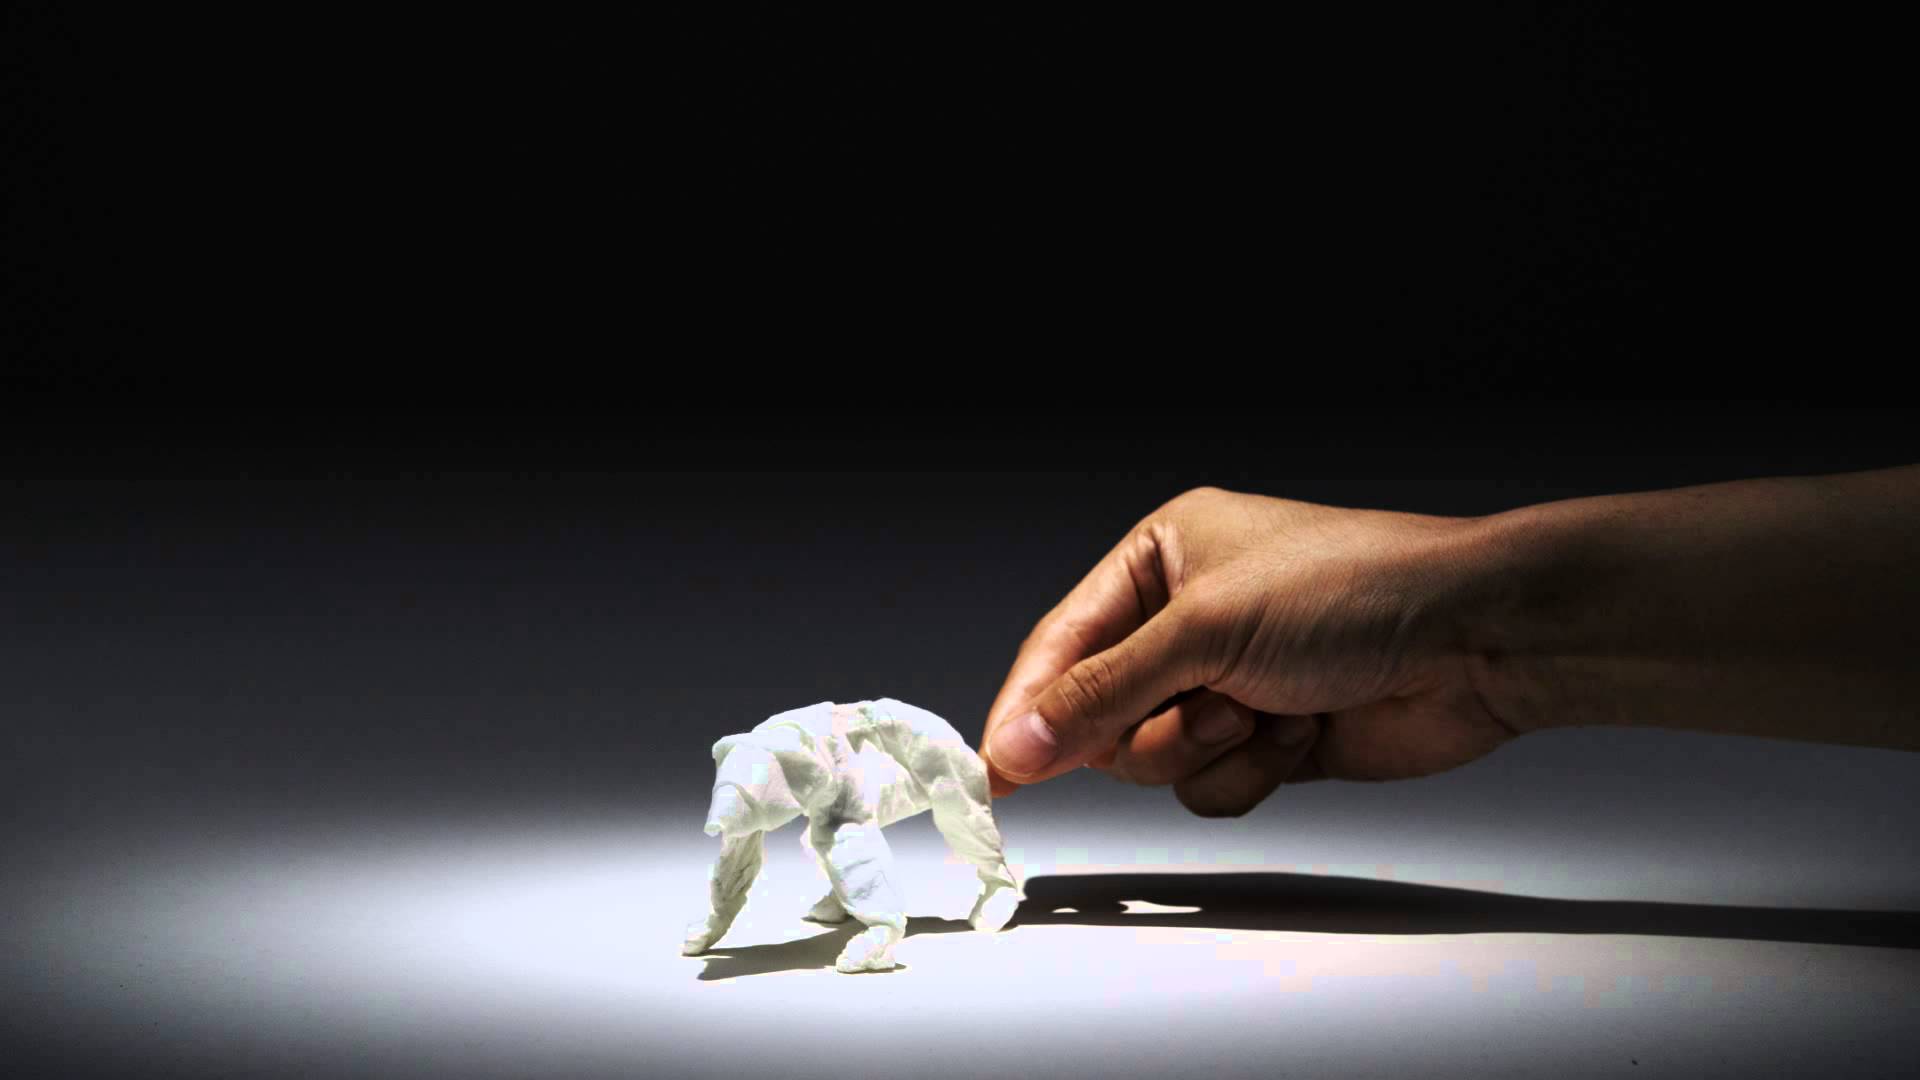 Tissue Paper Animals Brought to Life in Stop Motion Animation